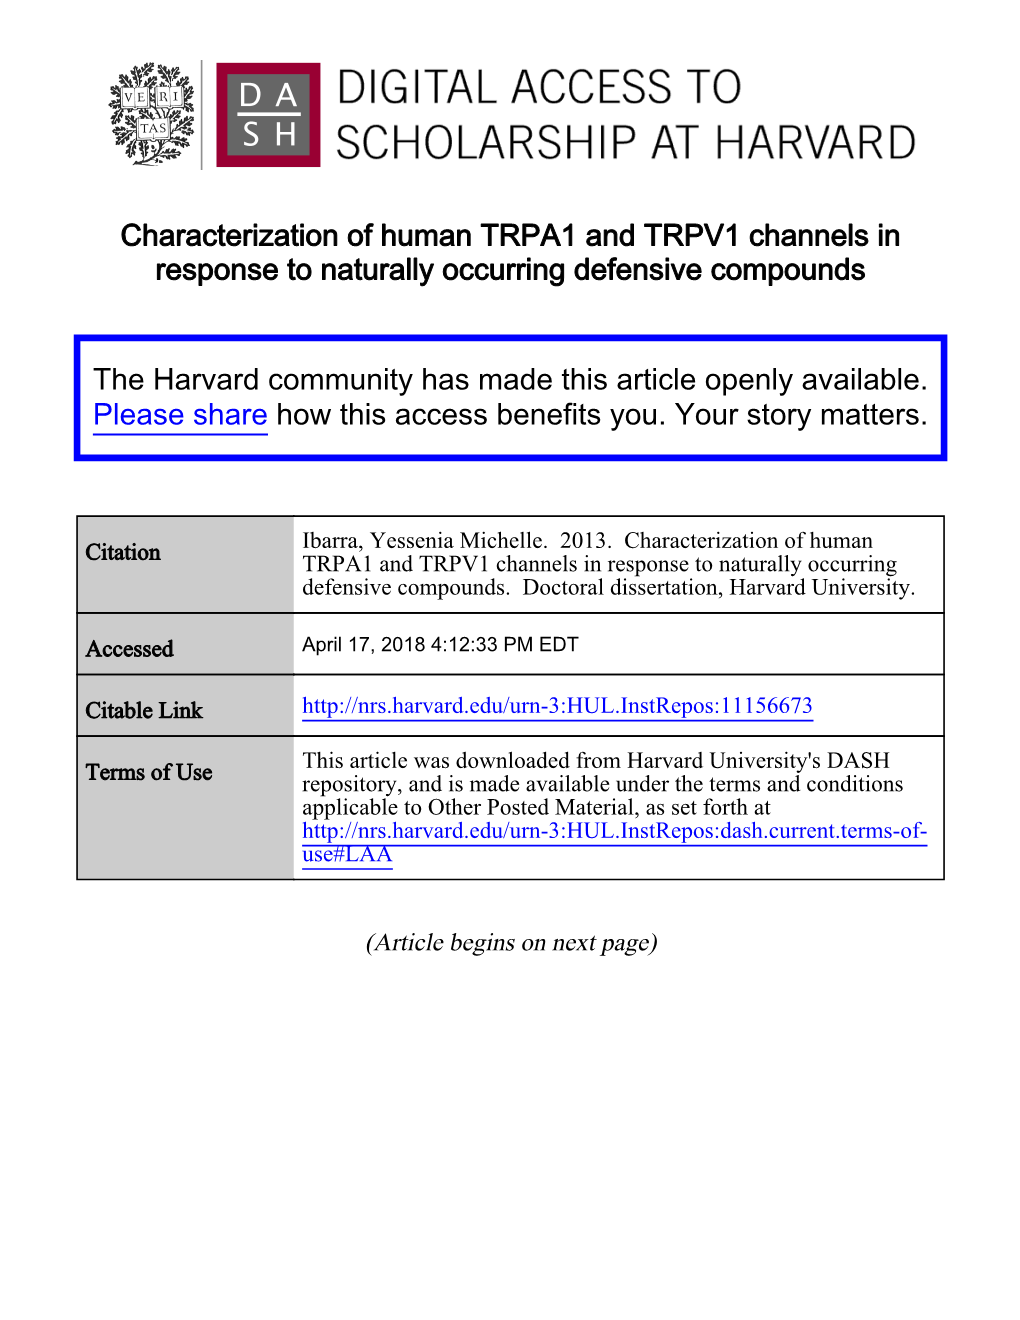 Characterization of Human TRPA1 and TRPV1 Channels in Response to Naturally Occurring Defensive Compounds